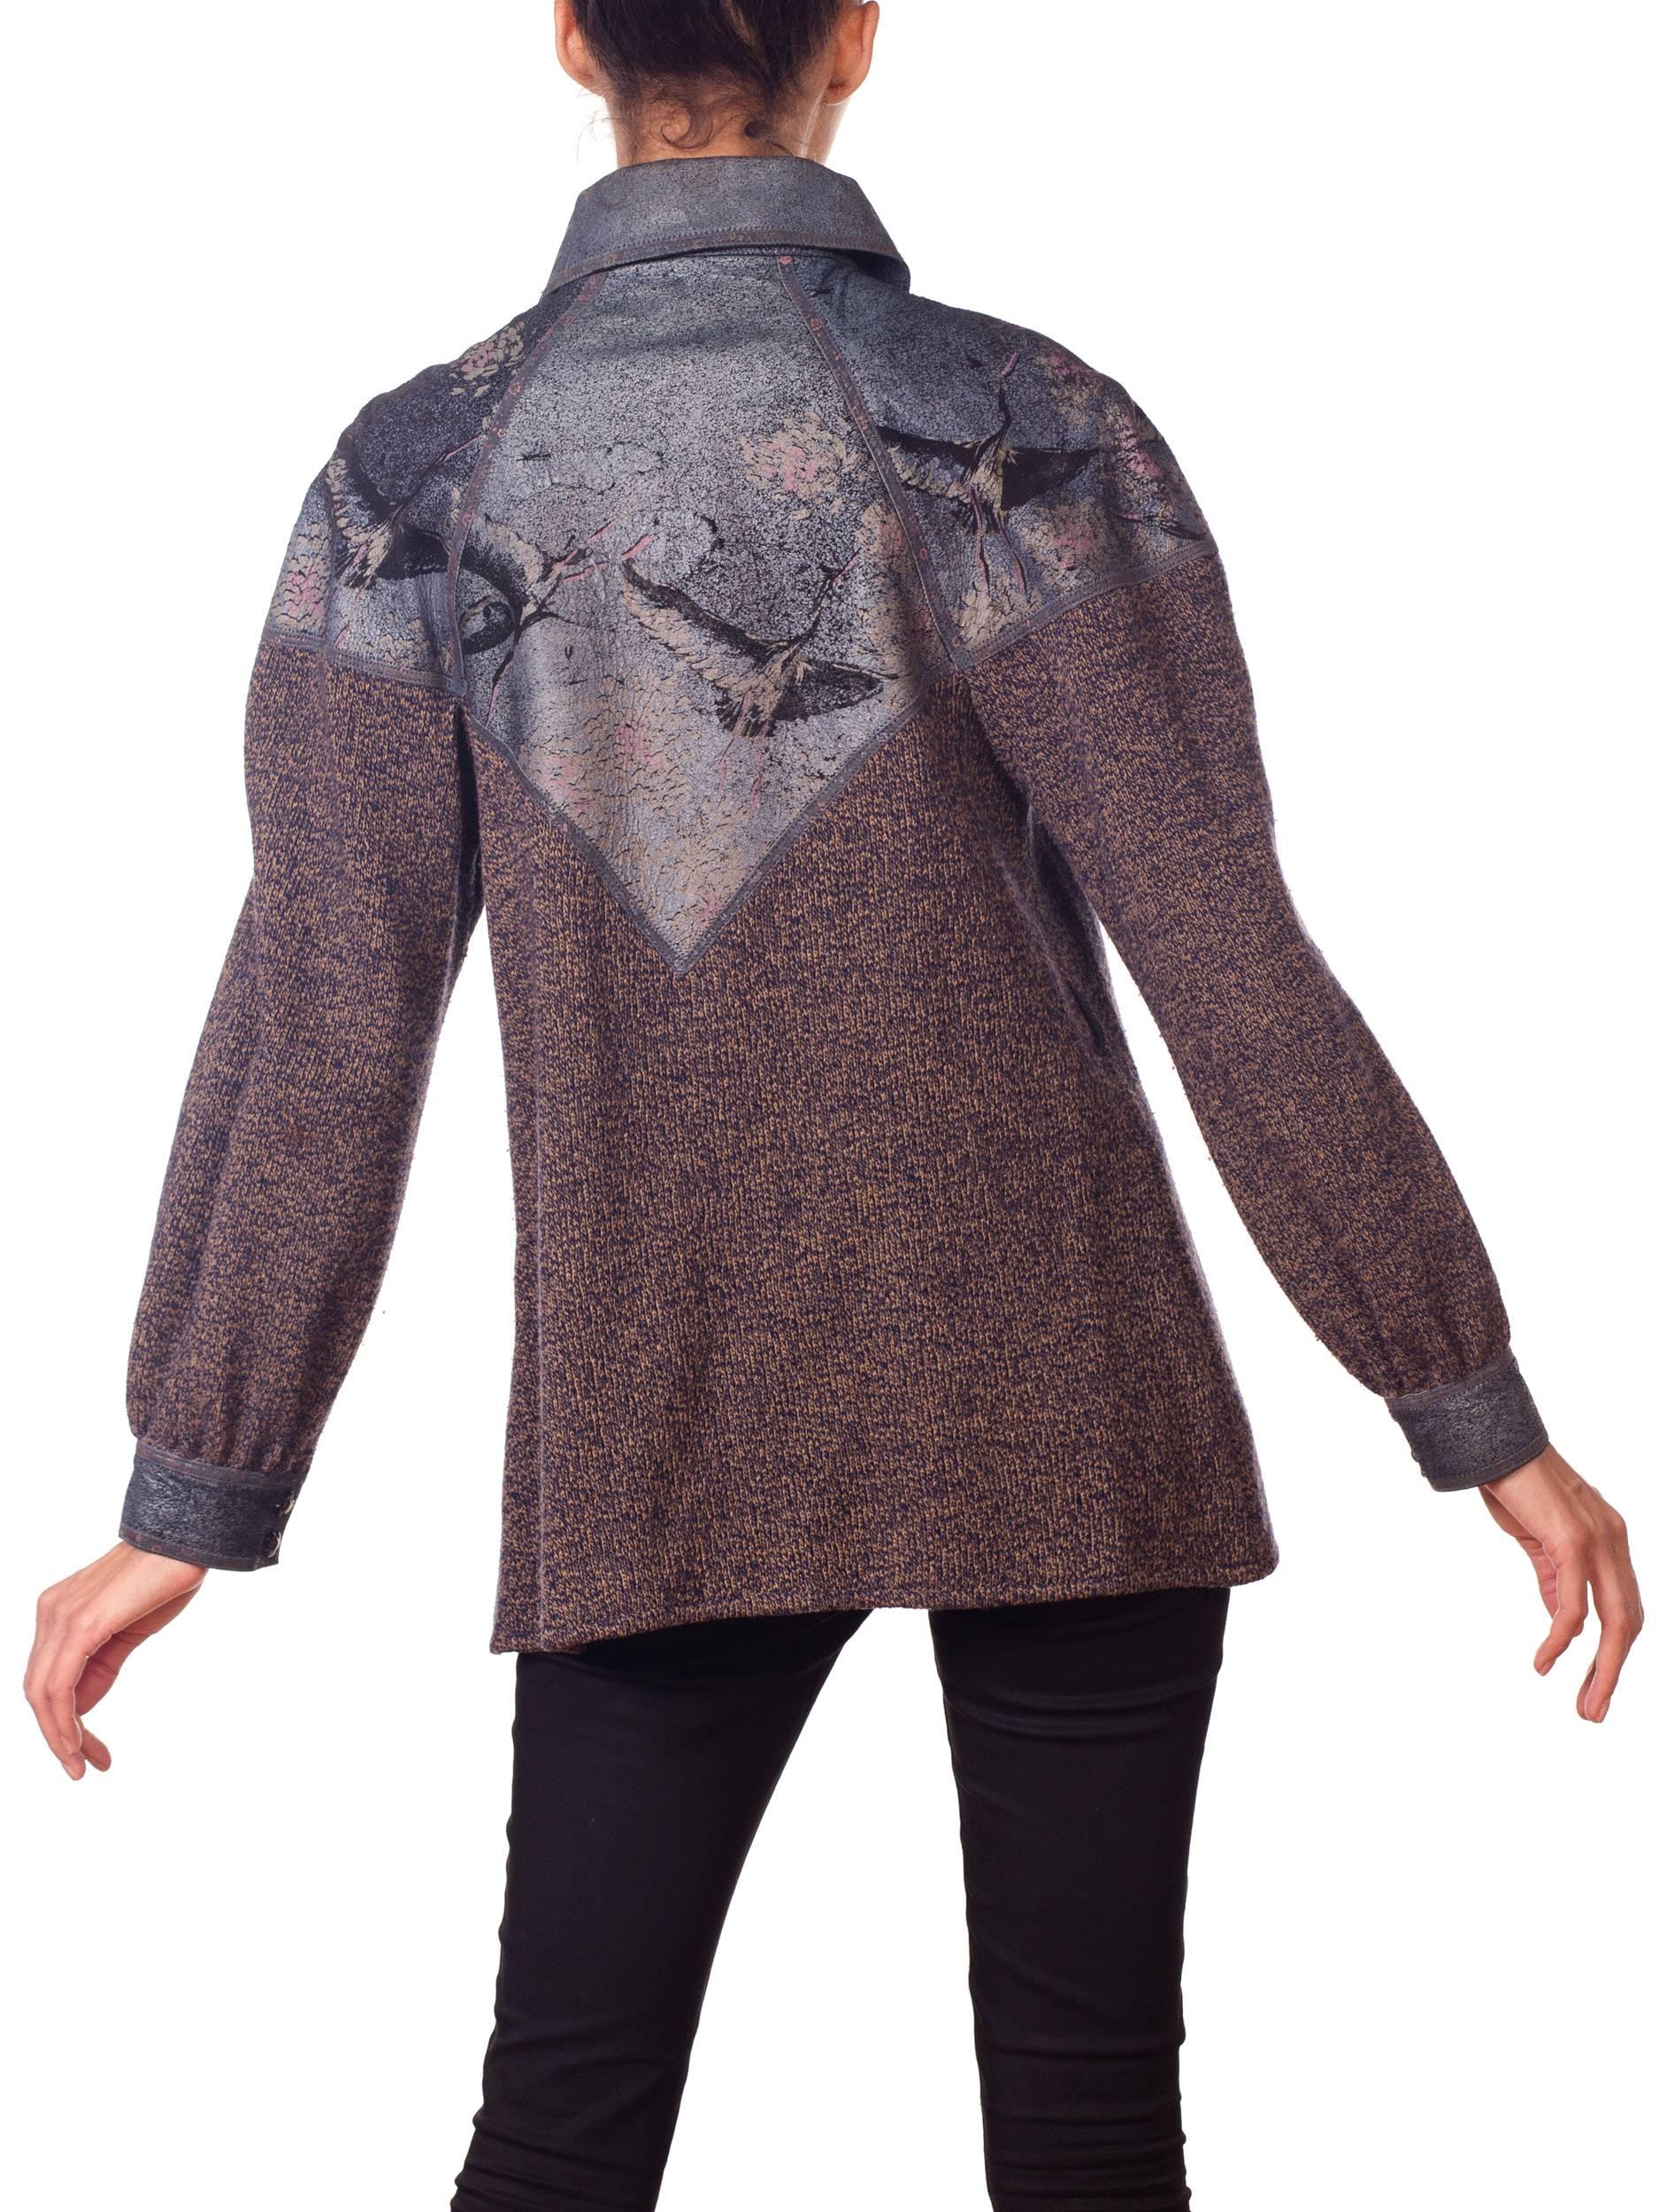 Roberto Cavalli Knit Sweater Jacket with Bird Printed Suede Panels 2